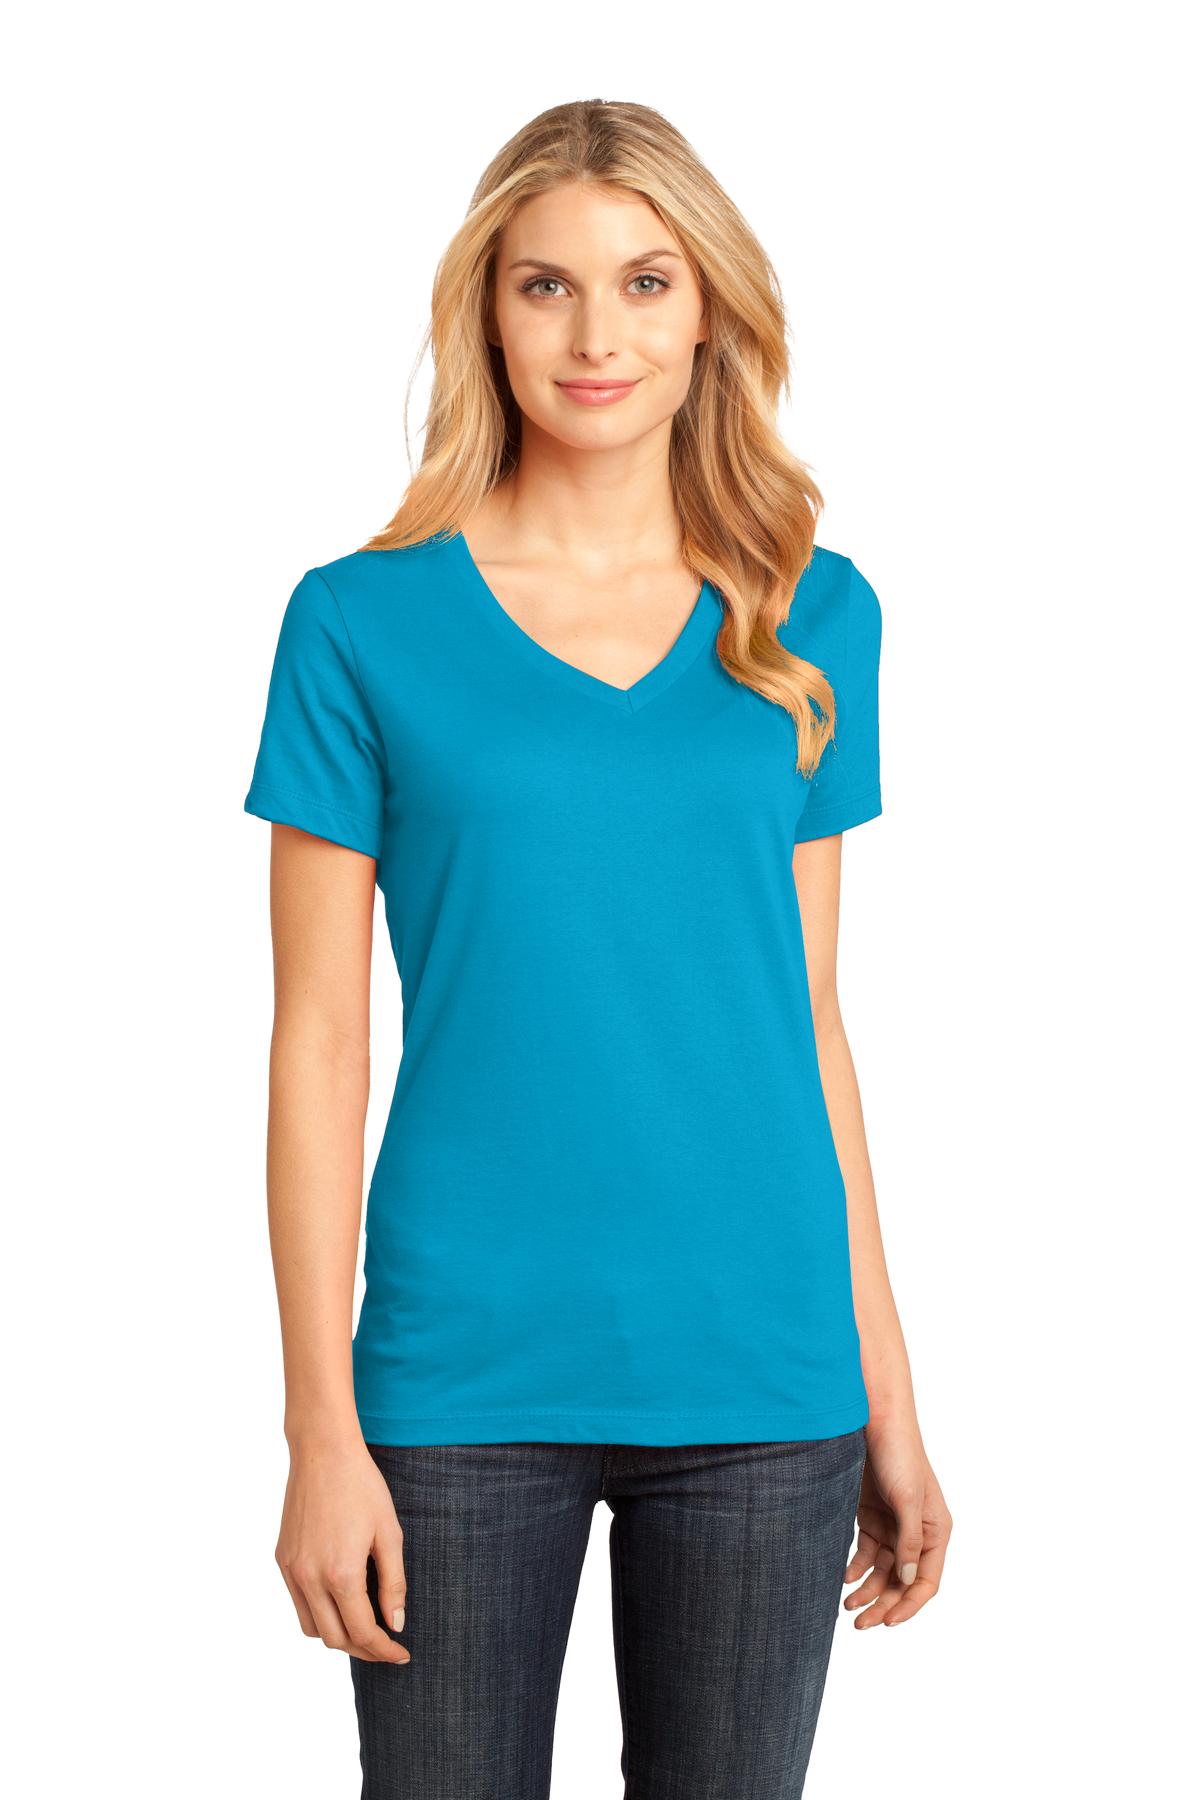 District - Womens Perfect Weight V-Neck Tee. DM1170L